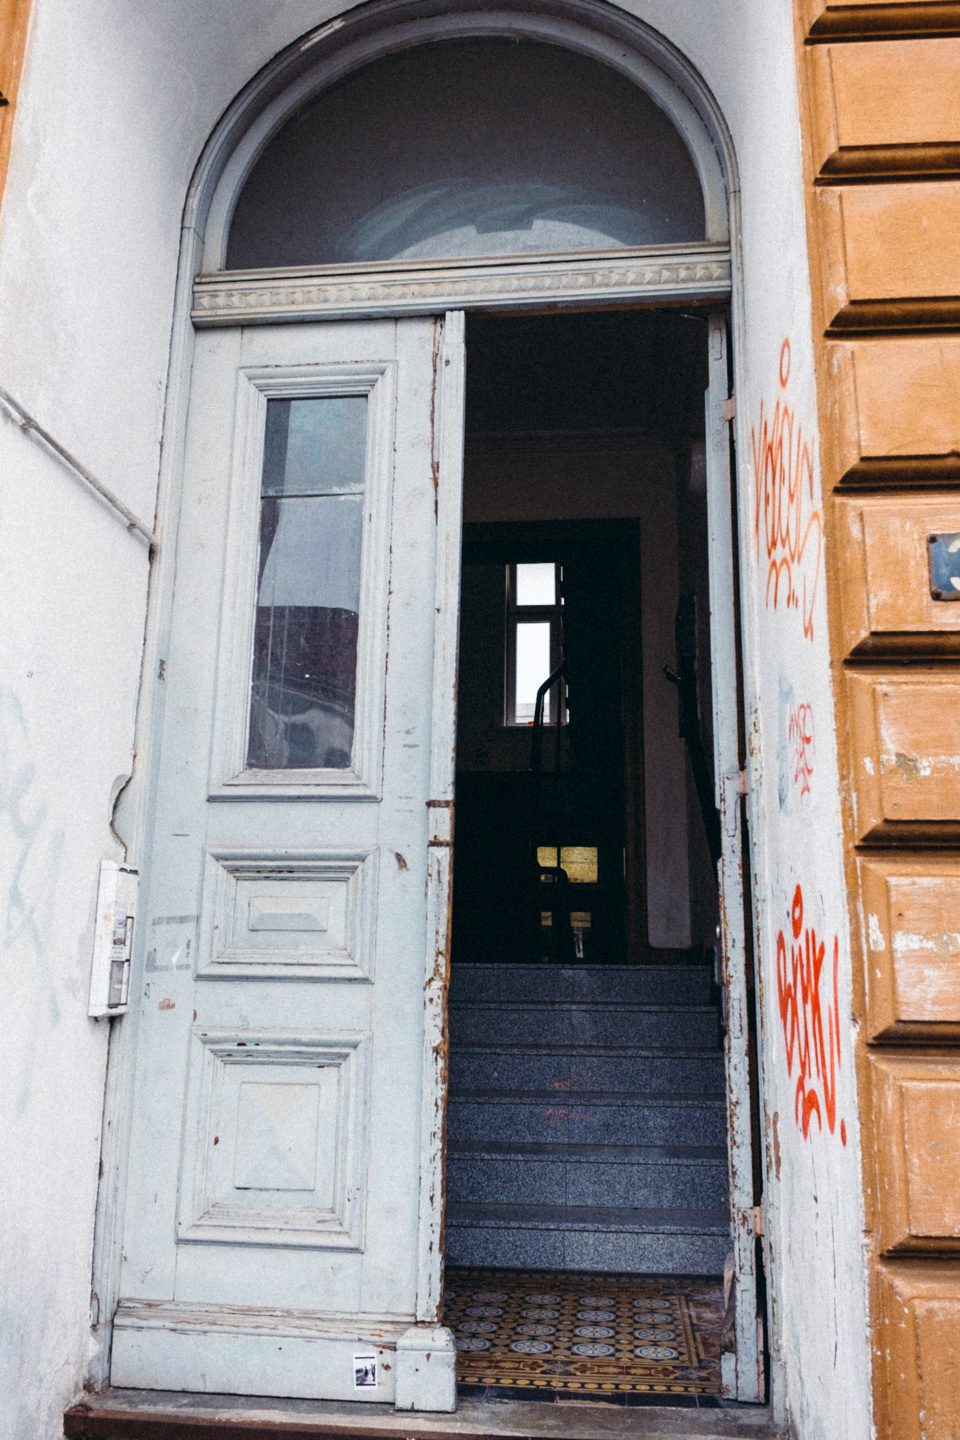 Entrance to an old tenement house